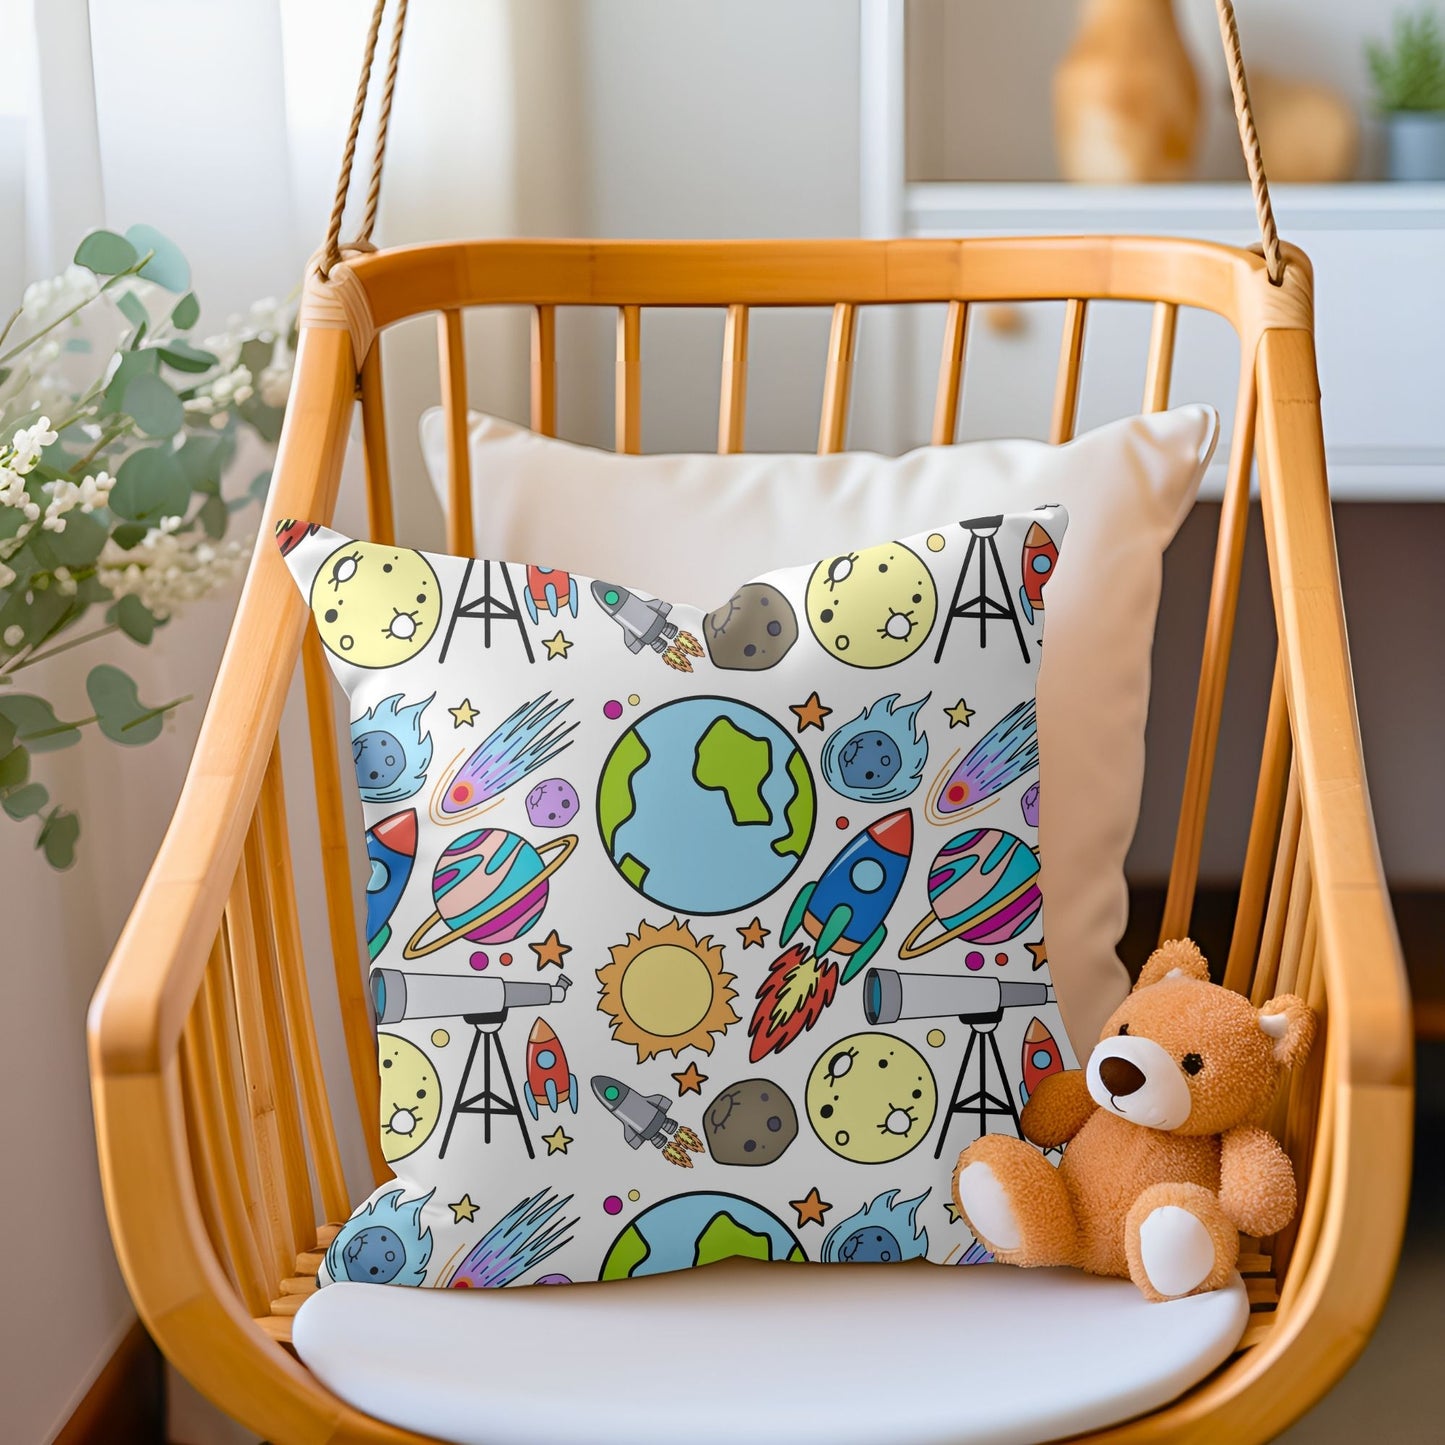 Adorable skyrockets patterned pillow to add a celestial touch to nurseries.